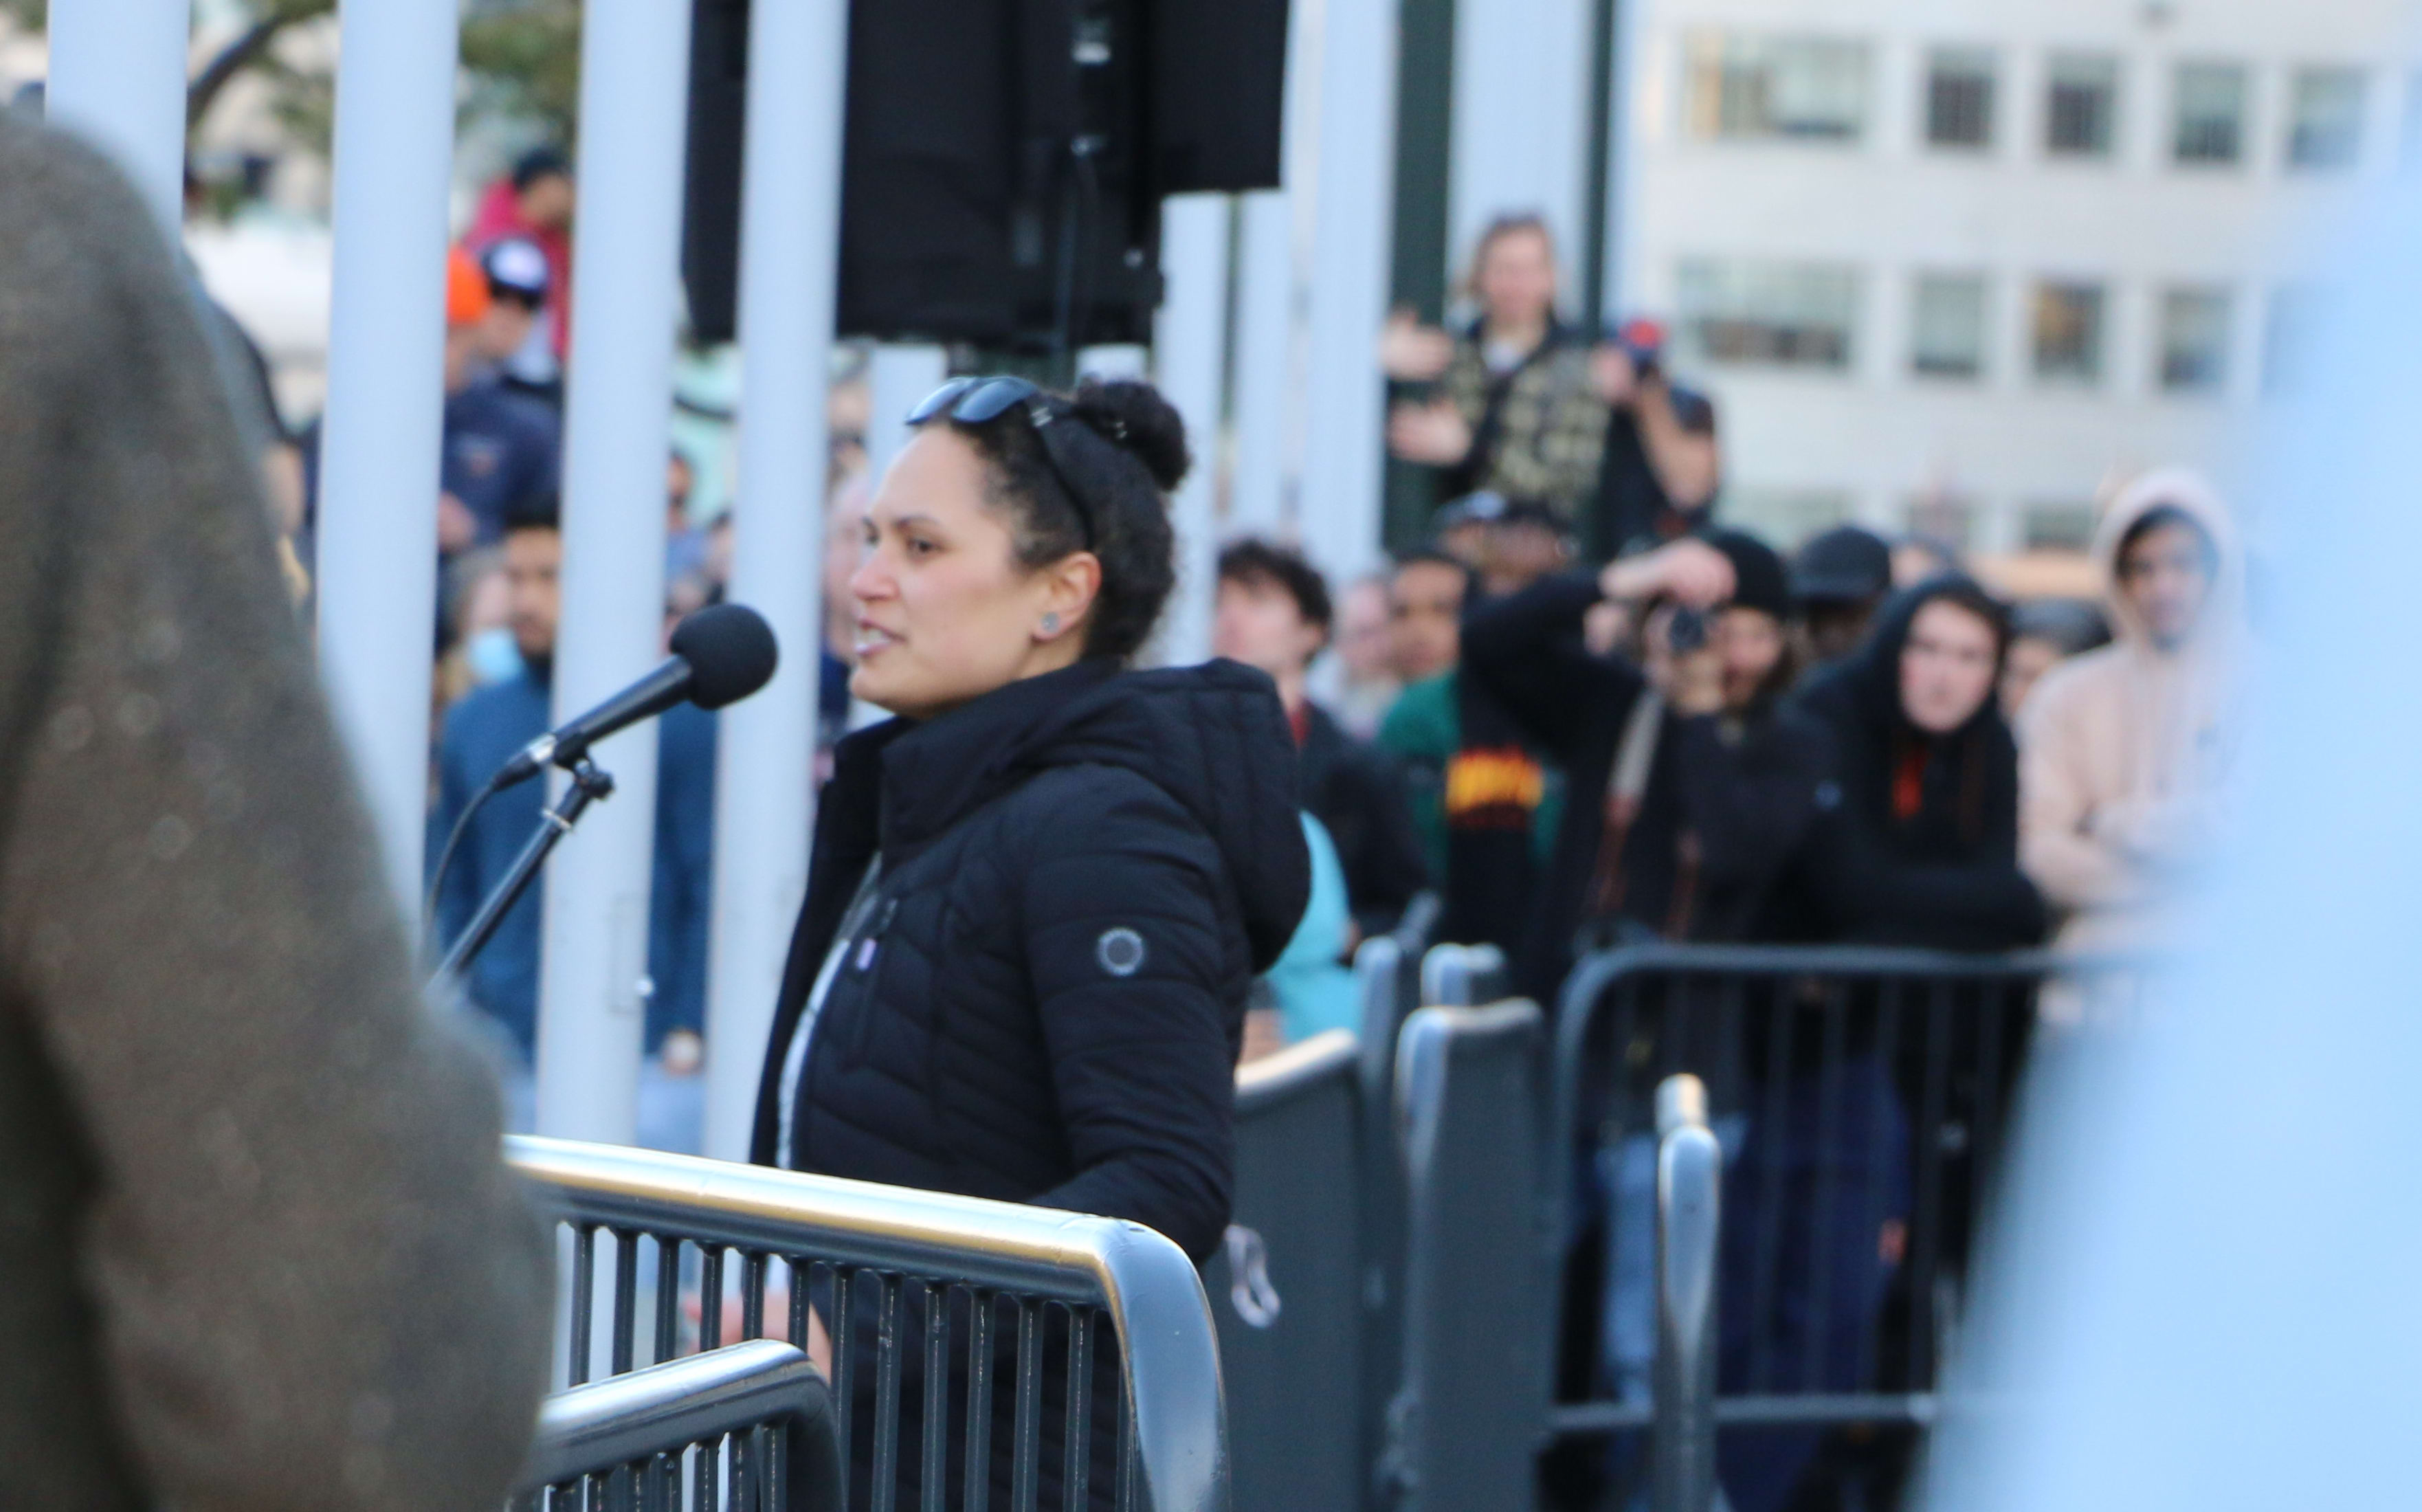 Victoria University Pacific lecturer and native Hawaiian Emalani Case speaking at the Black Lives Matter march in Wellington on 14 June, 2020.